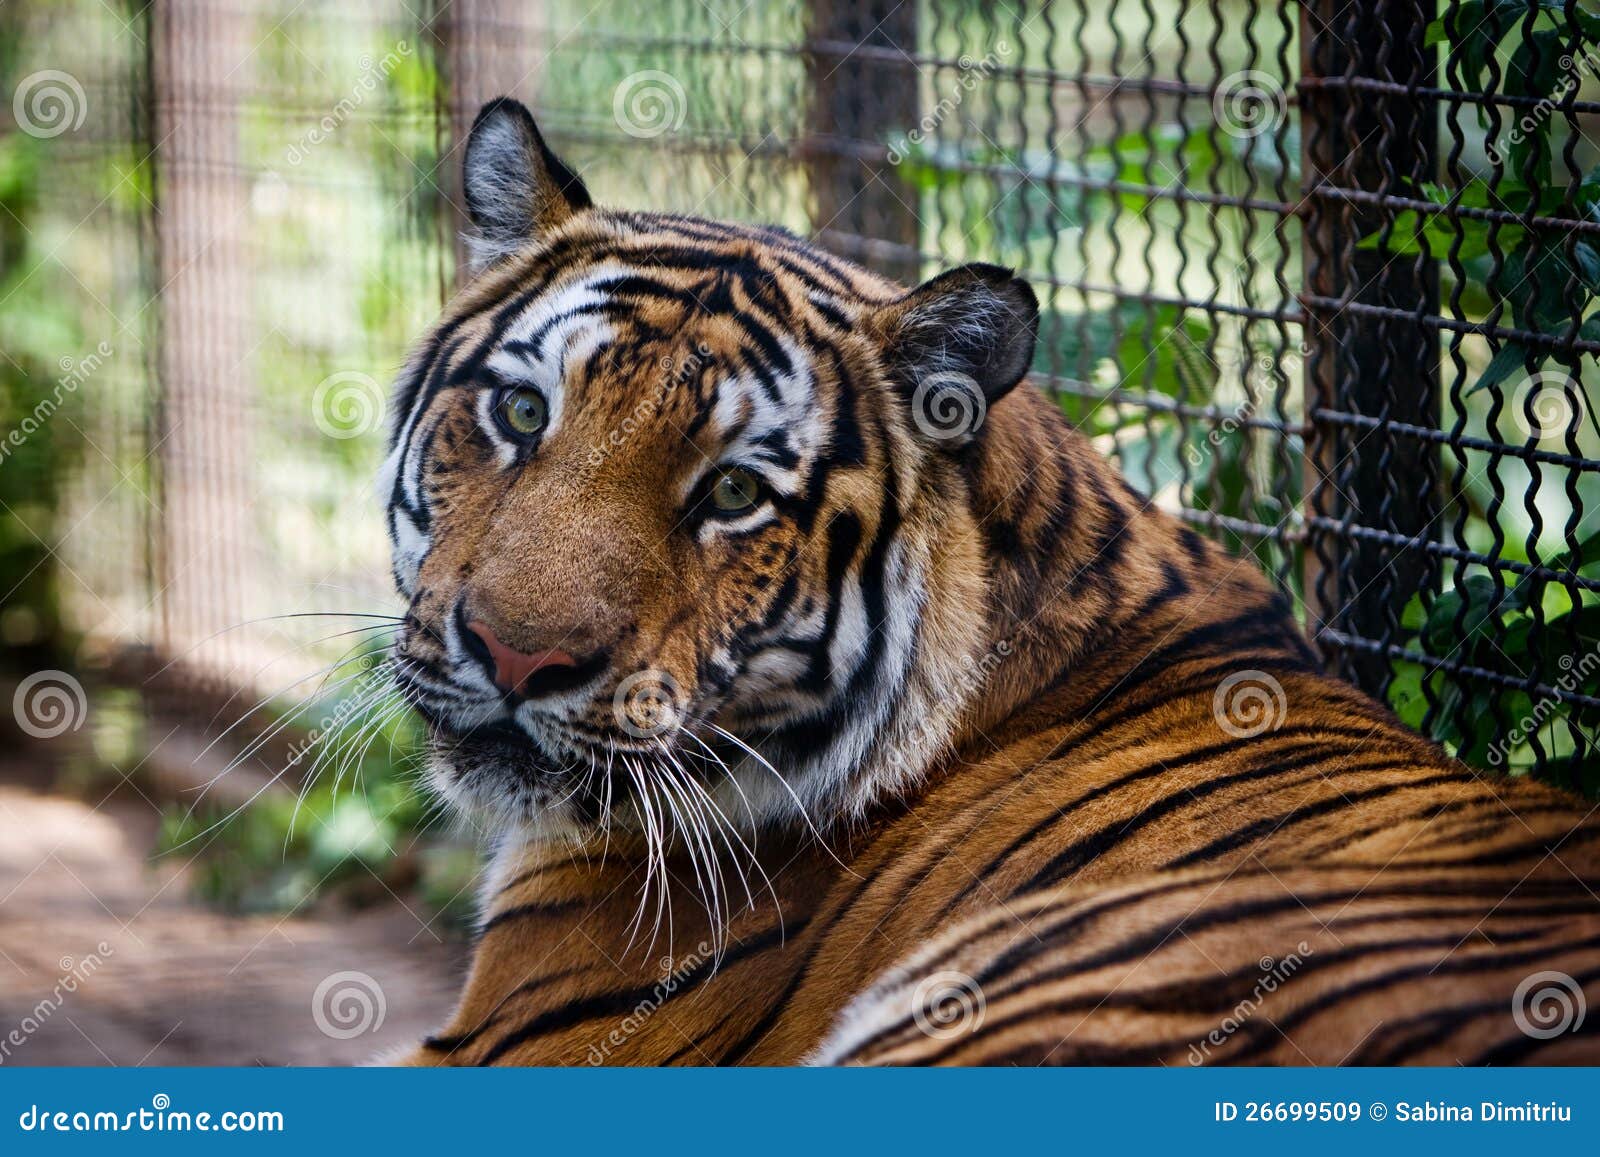 bengal tiger in captivity